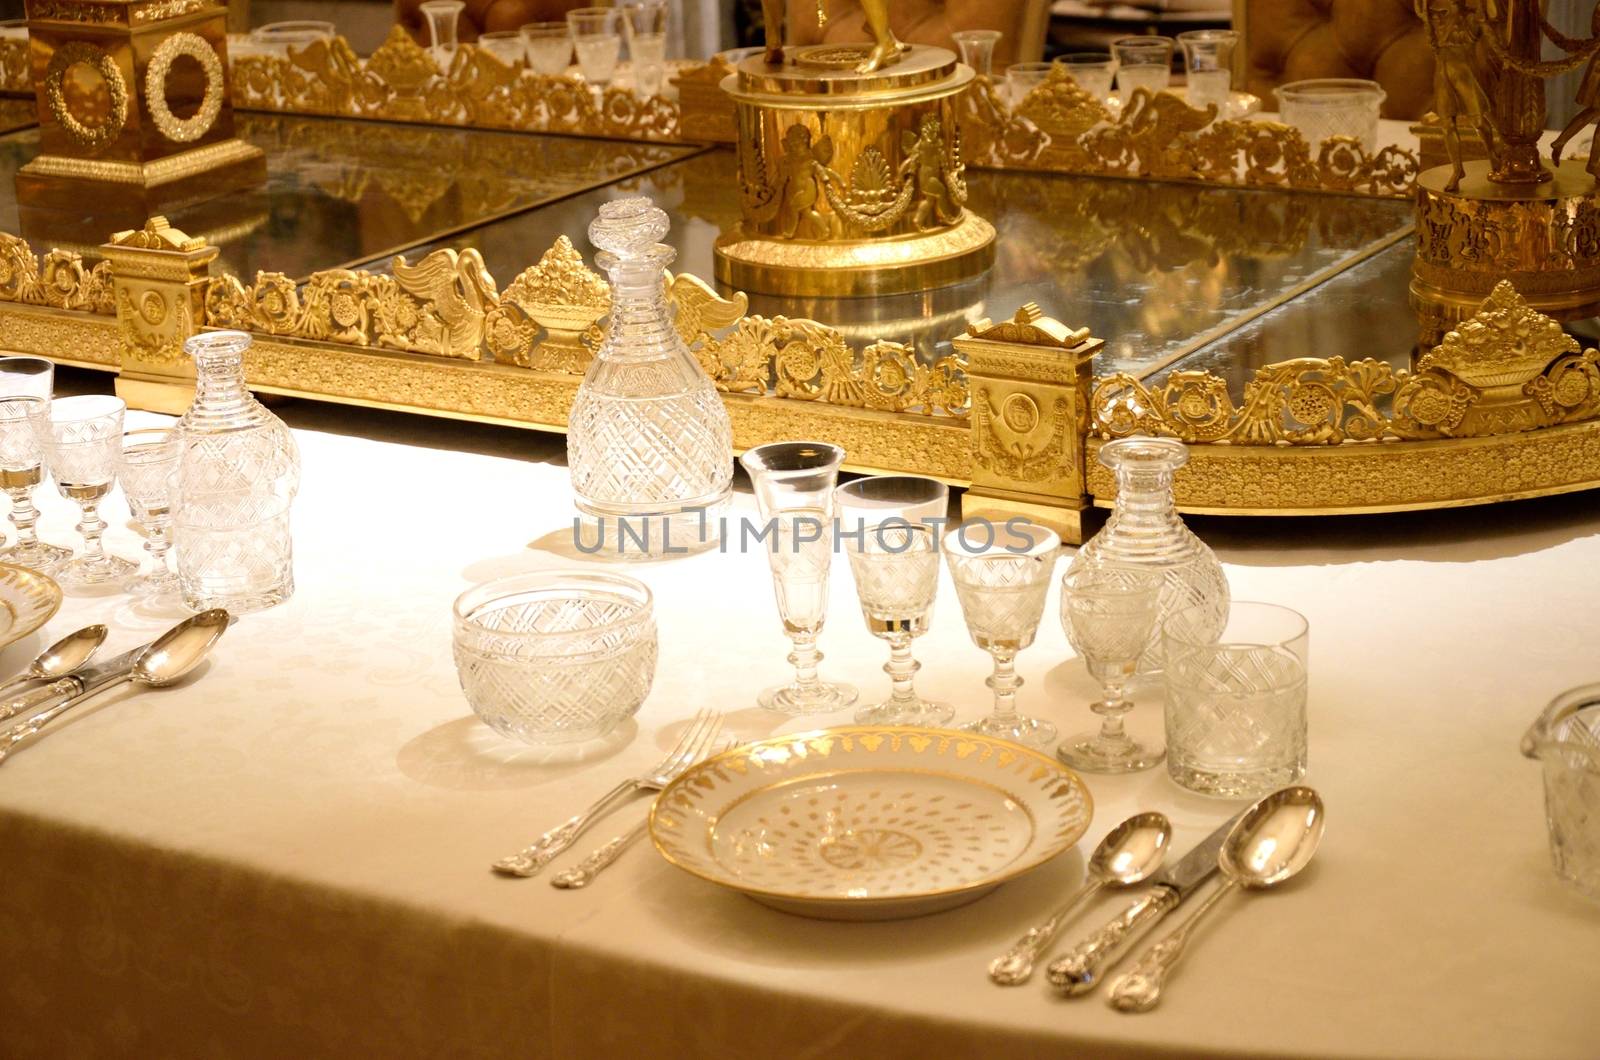 Aristocratic table set up by pauws99